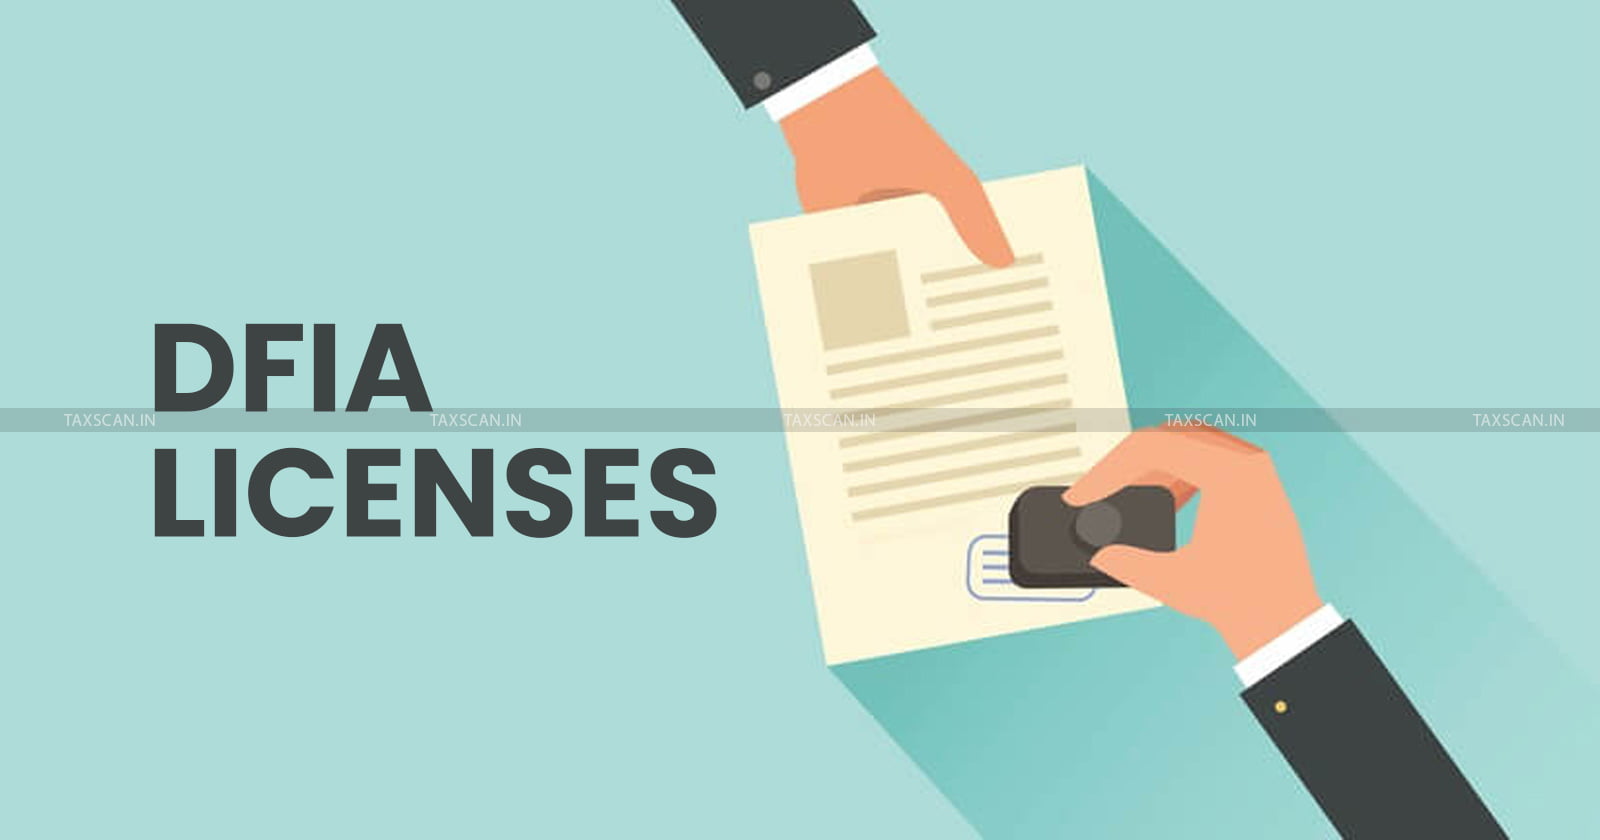 GST - Sale of DFIA licenses - Purchase of DFIA licenses - AAR - taxscan